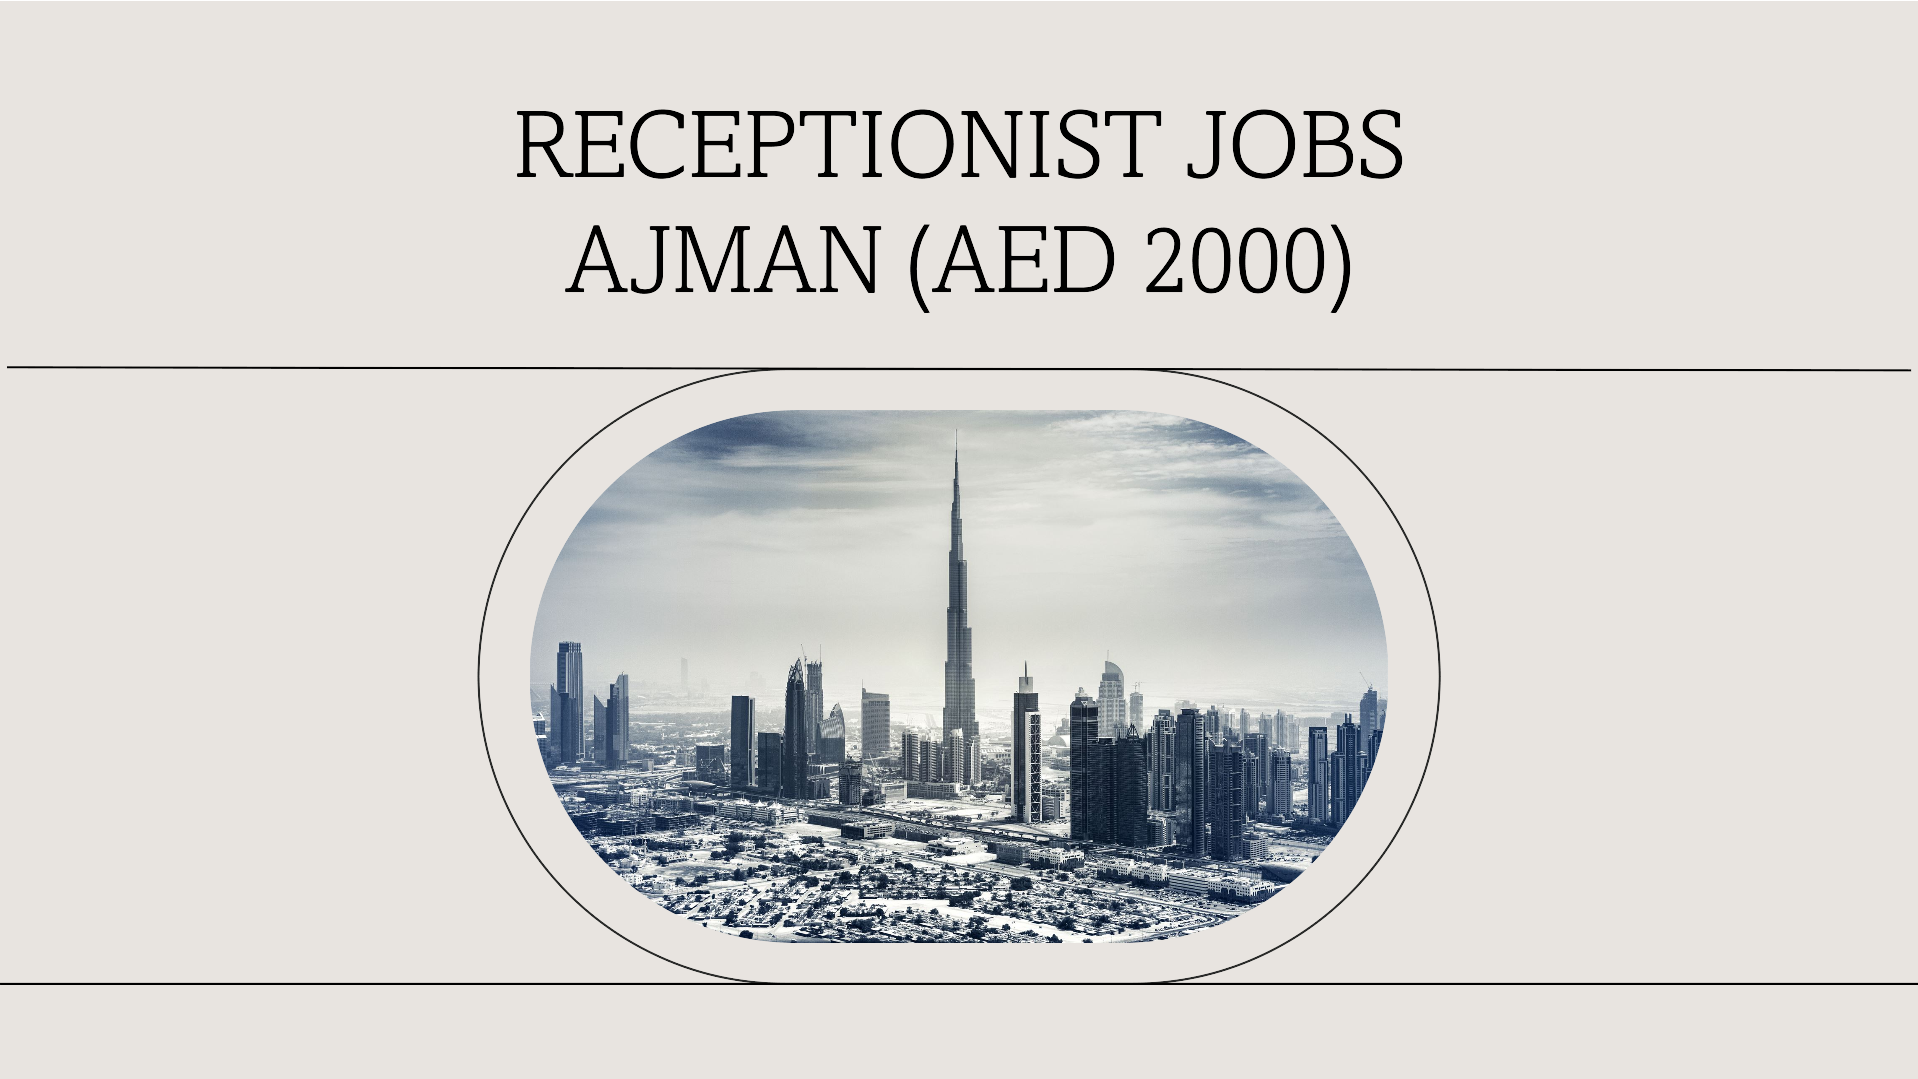 Receptionist jobs Ajman for all nationalities (AED 2000)